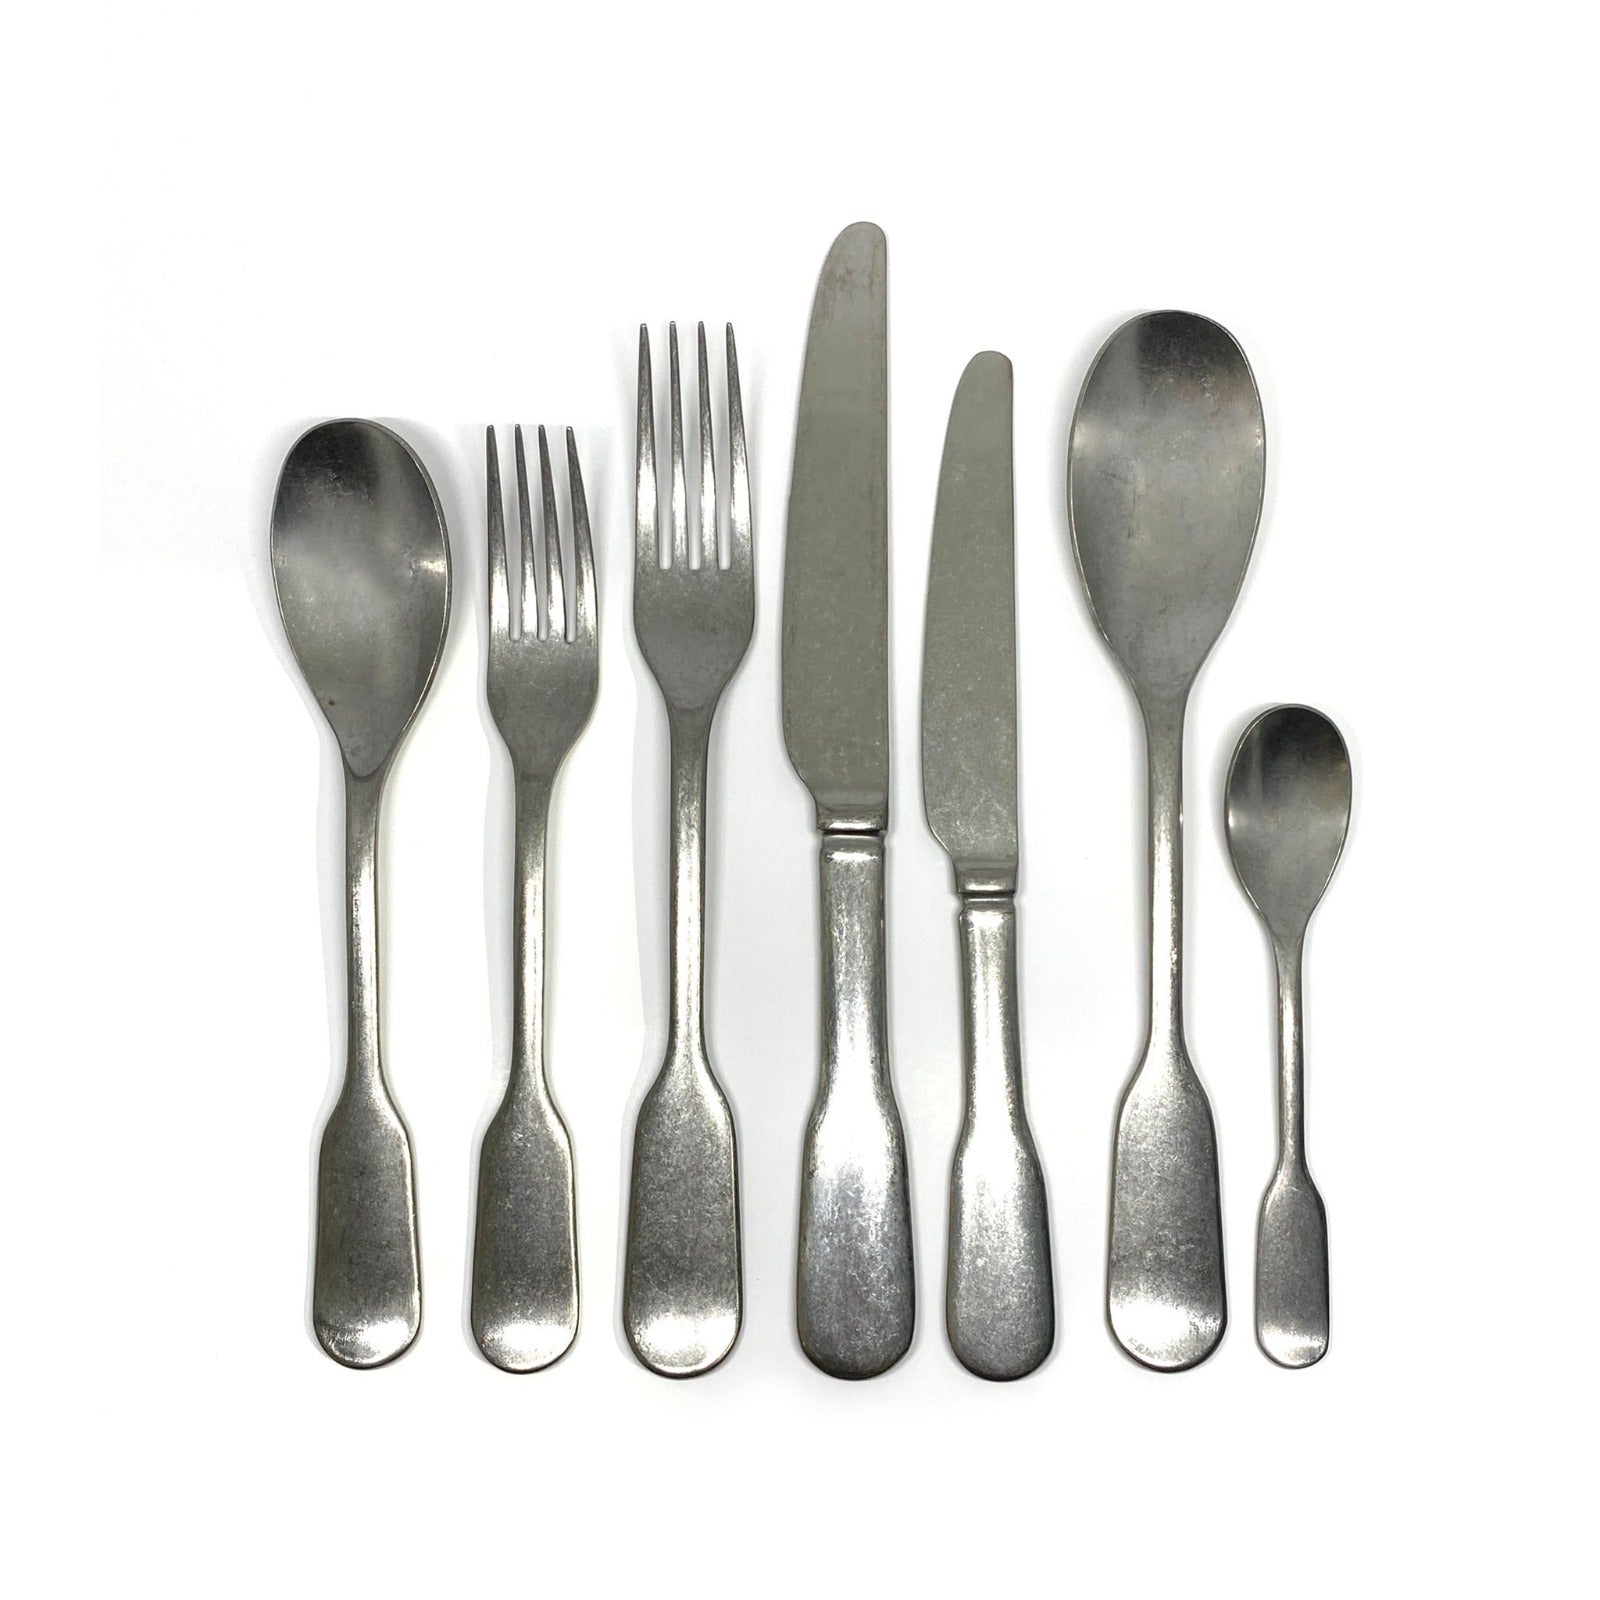 Calais 7 Piece Cutlery Set for one - Vintage Satin Finish - Stainless Steel